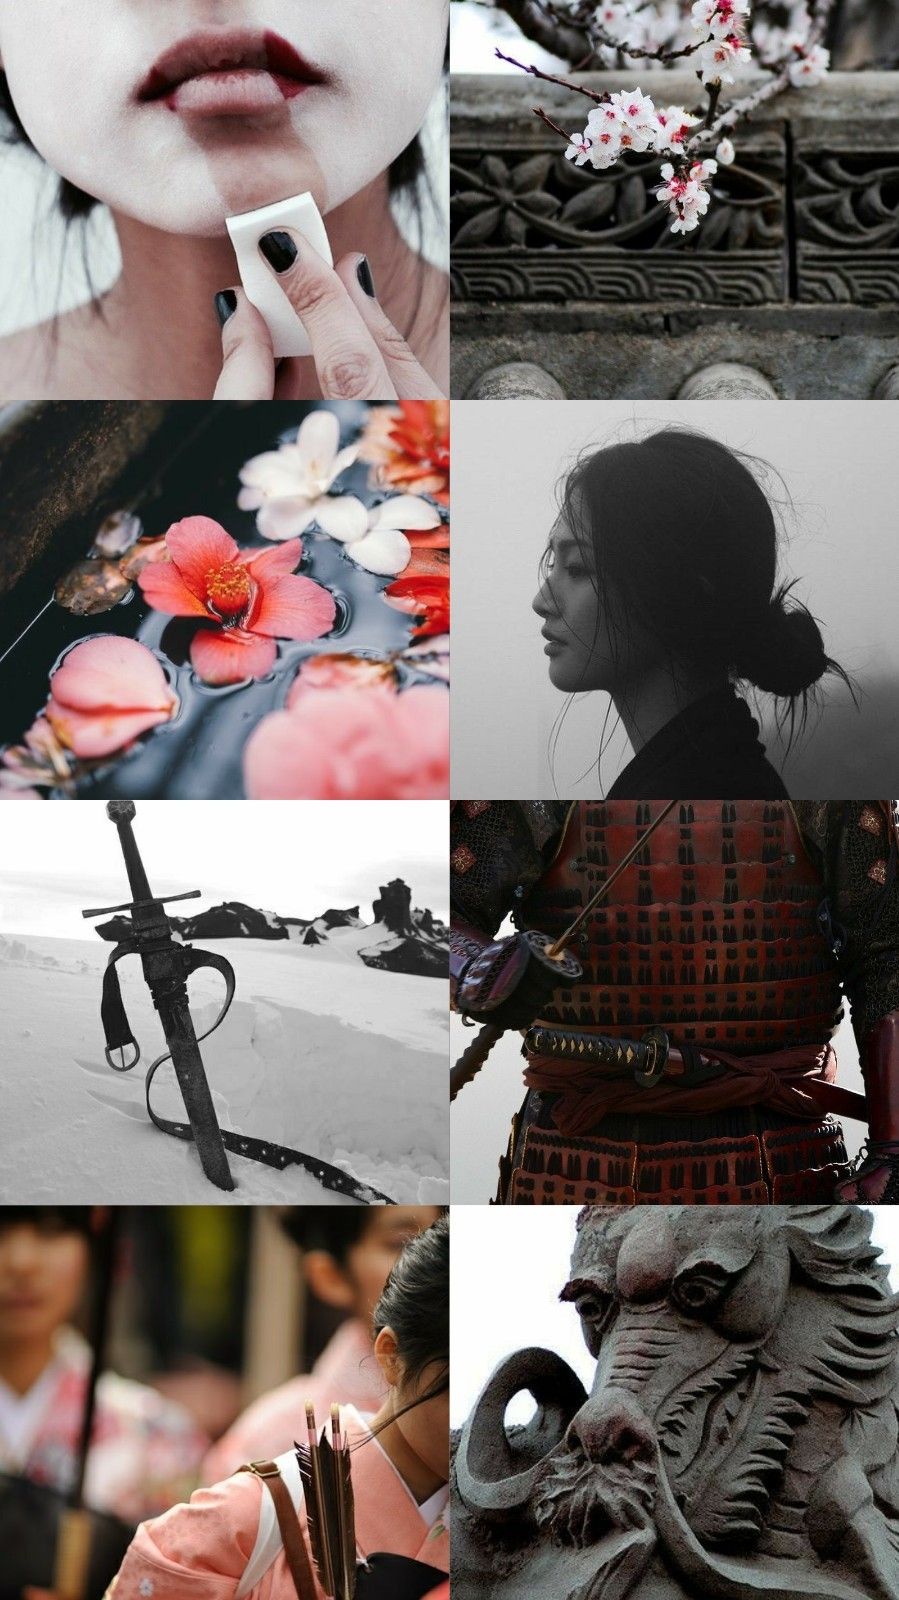 A collage of images with different themes - Mulan